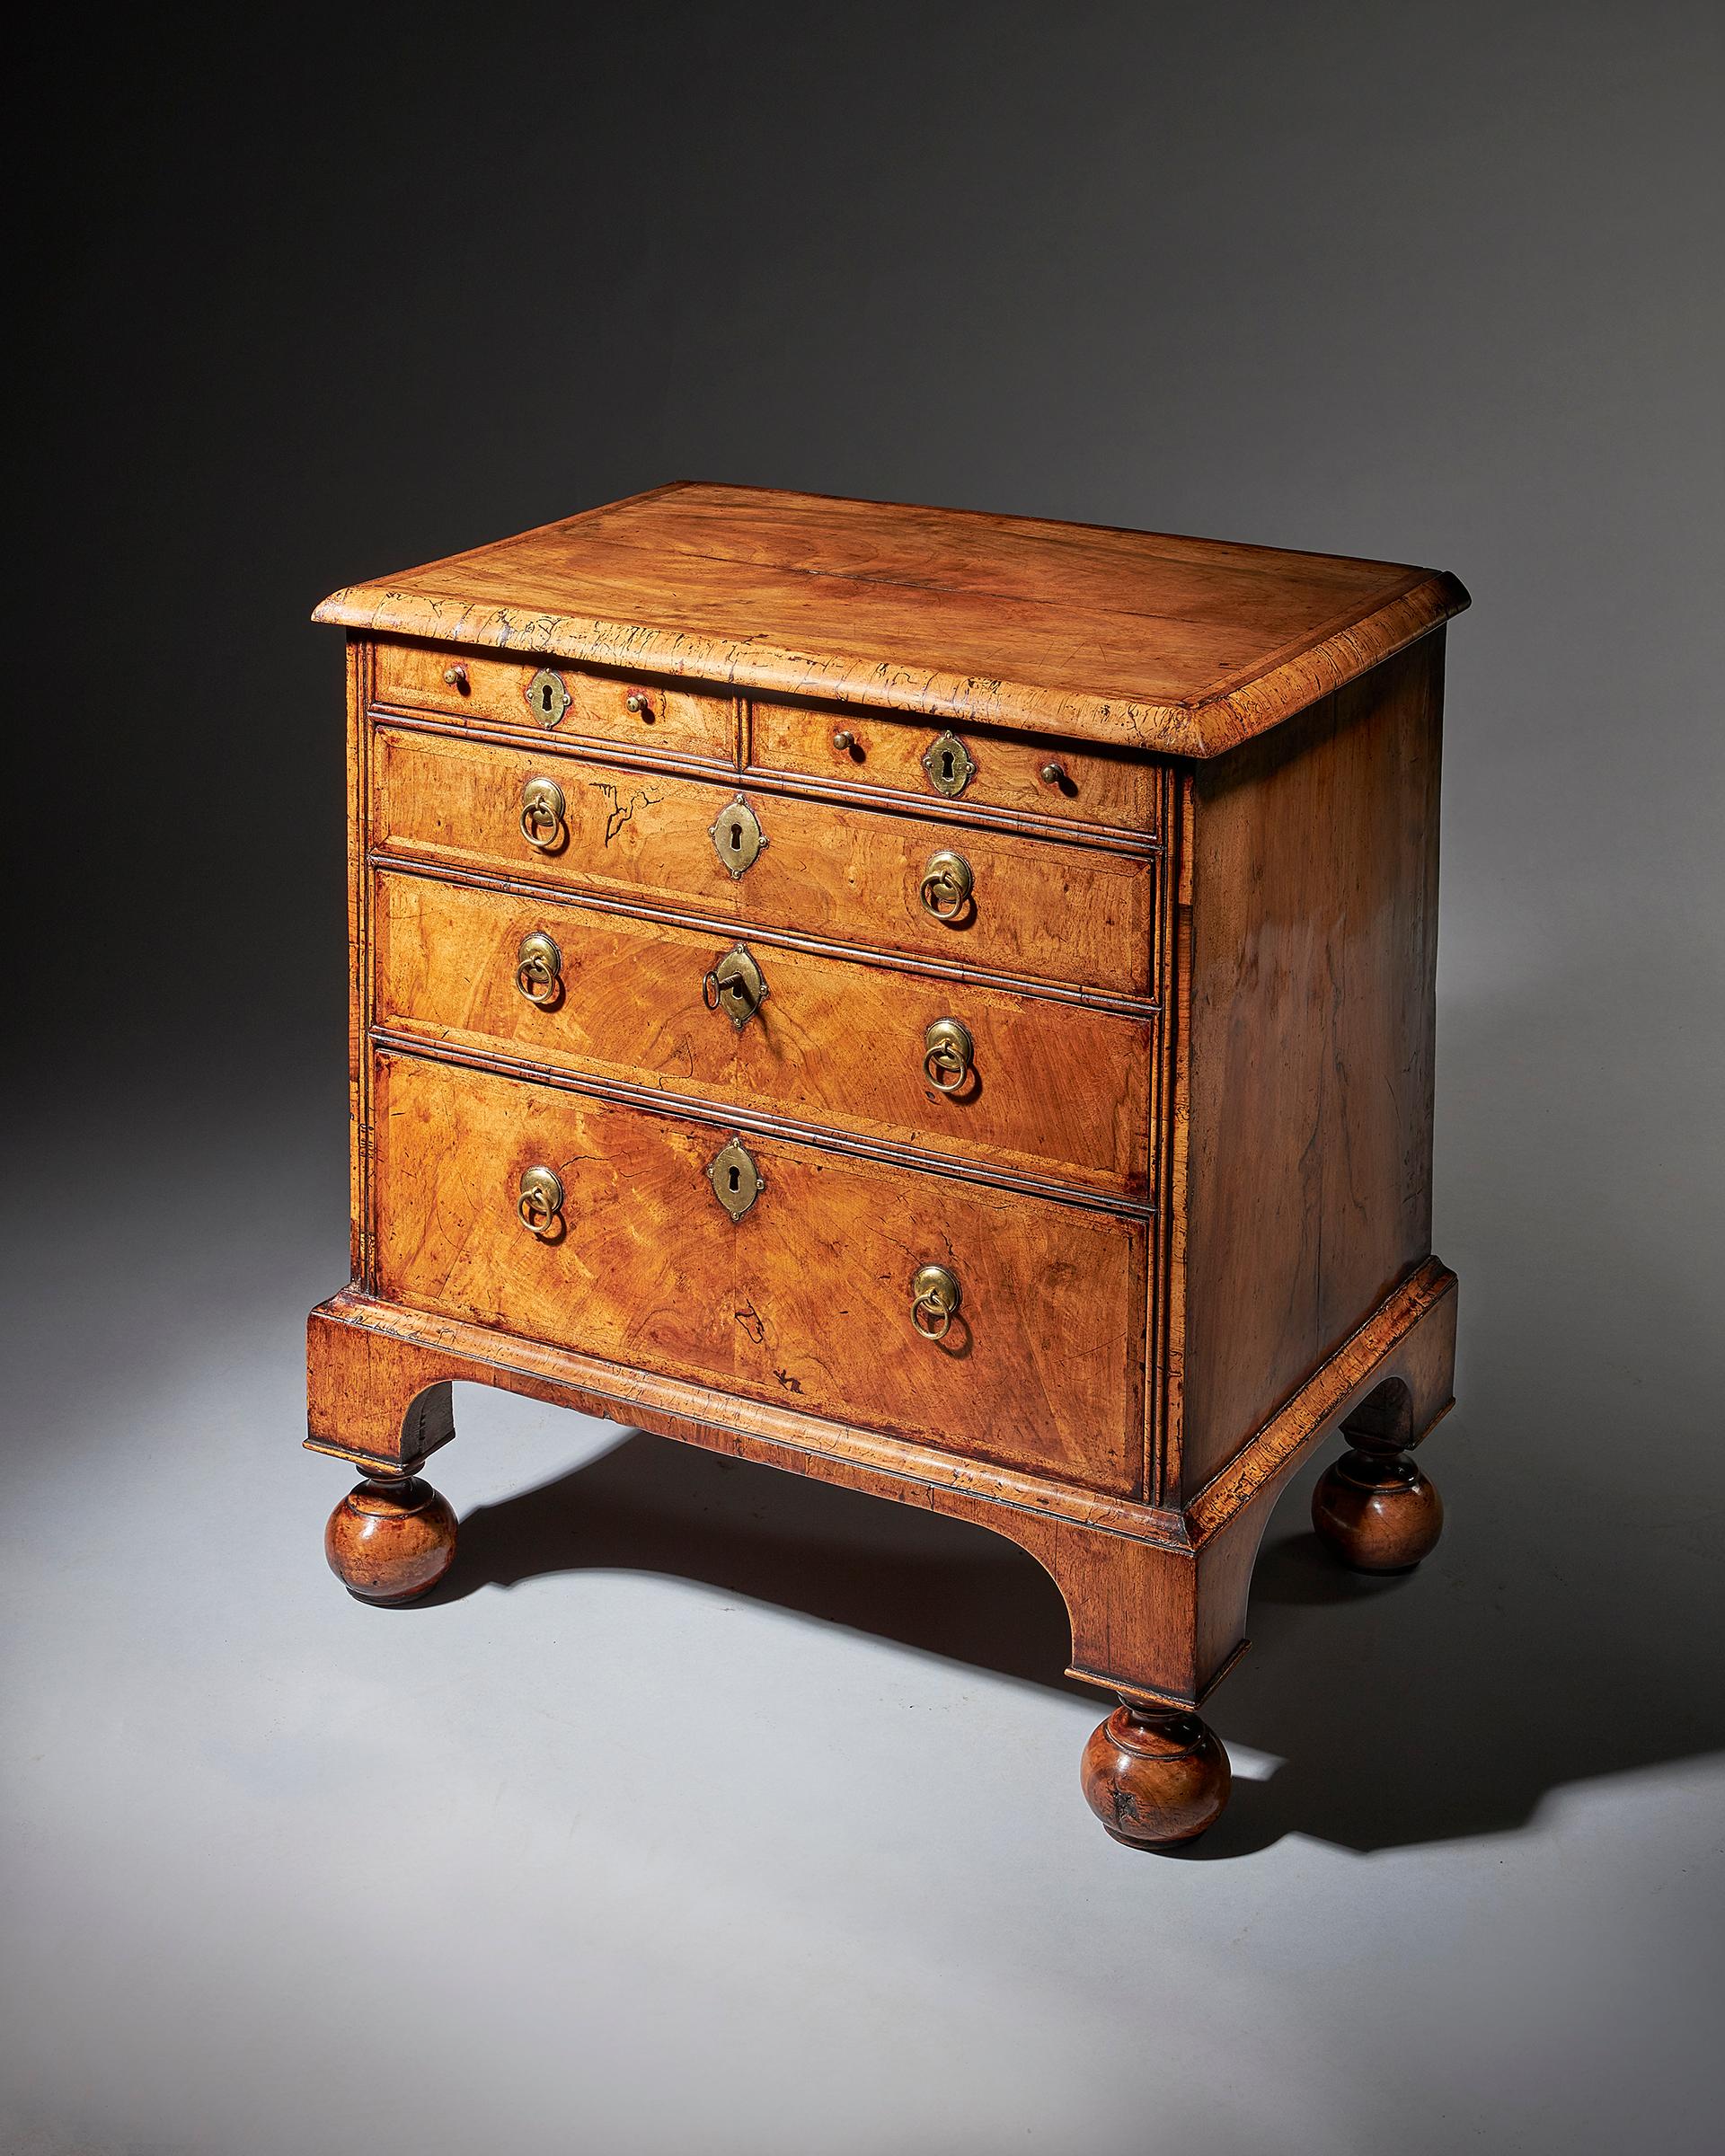 An extremely rare George I walnut chest of small proportions on ball and bracket 1